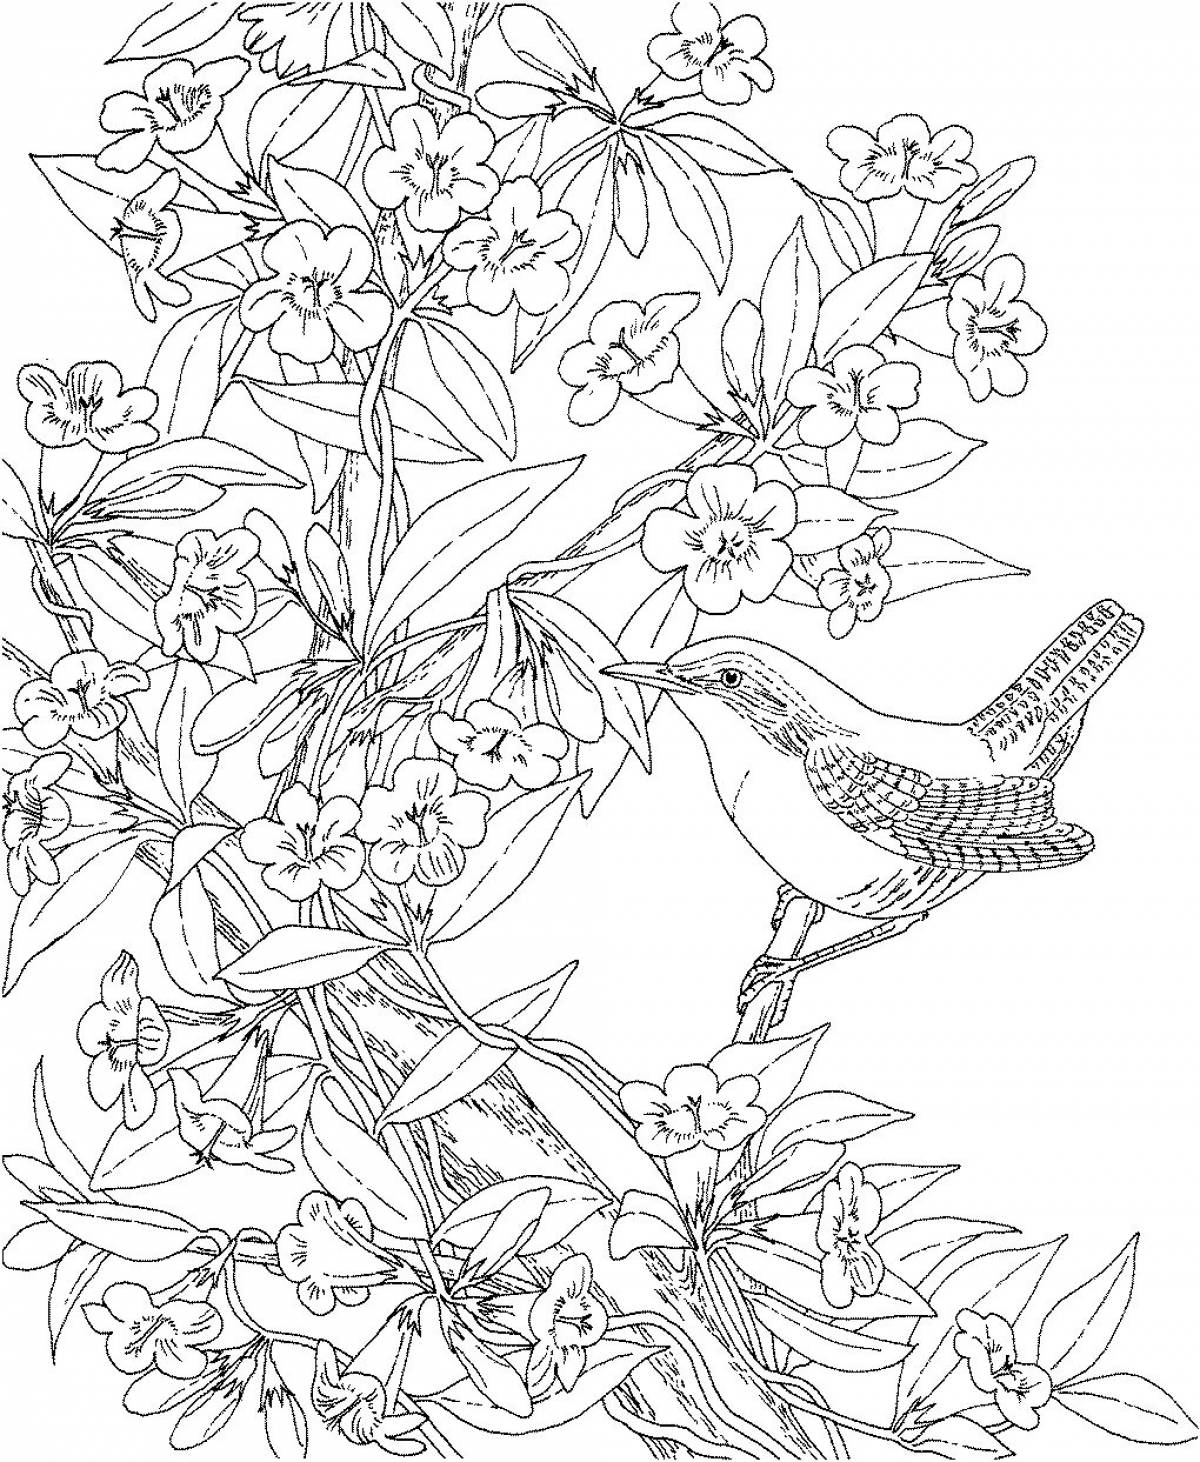 Attractive spring anti-stress coloring book